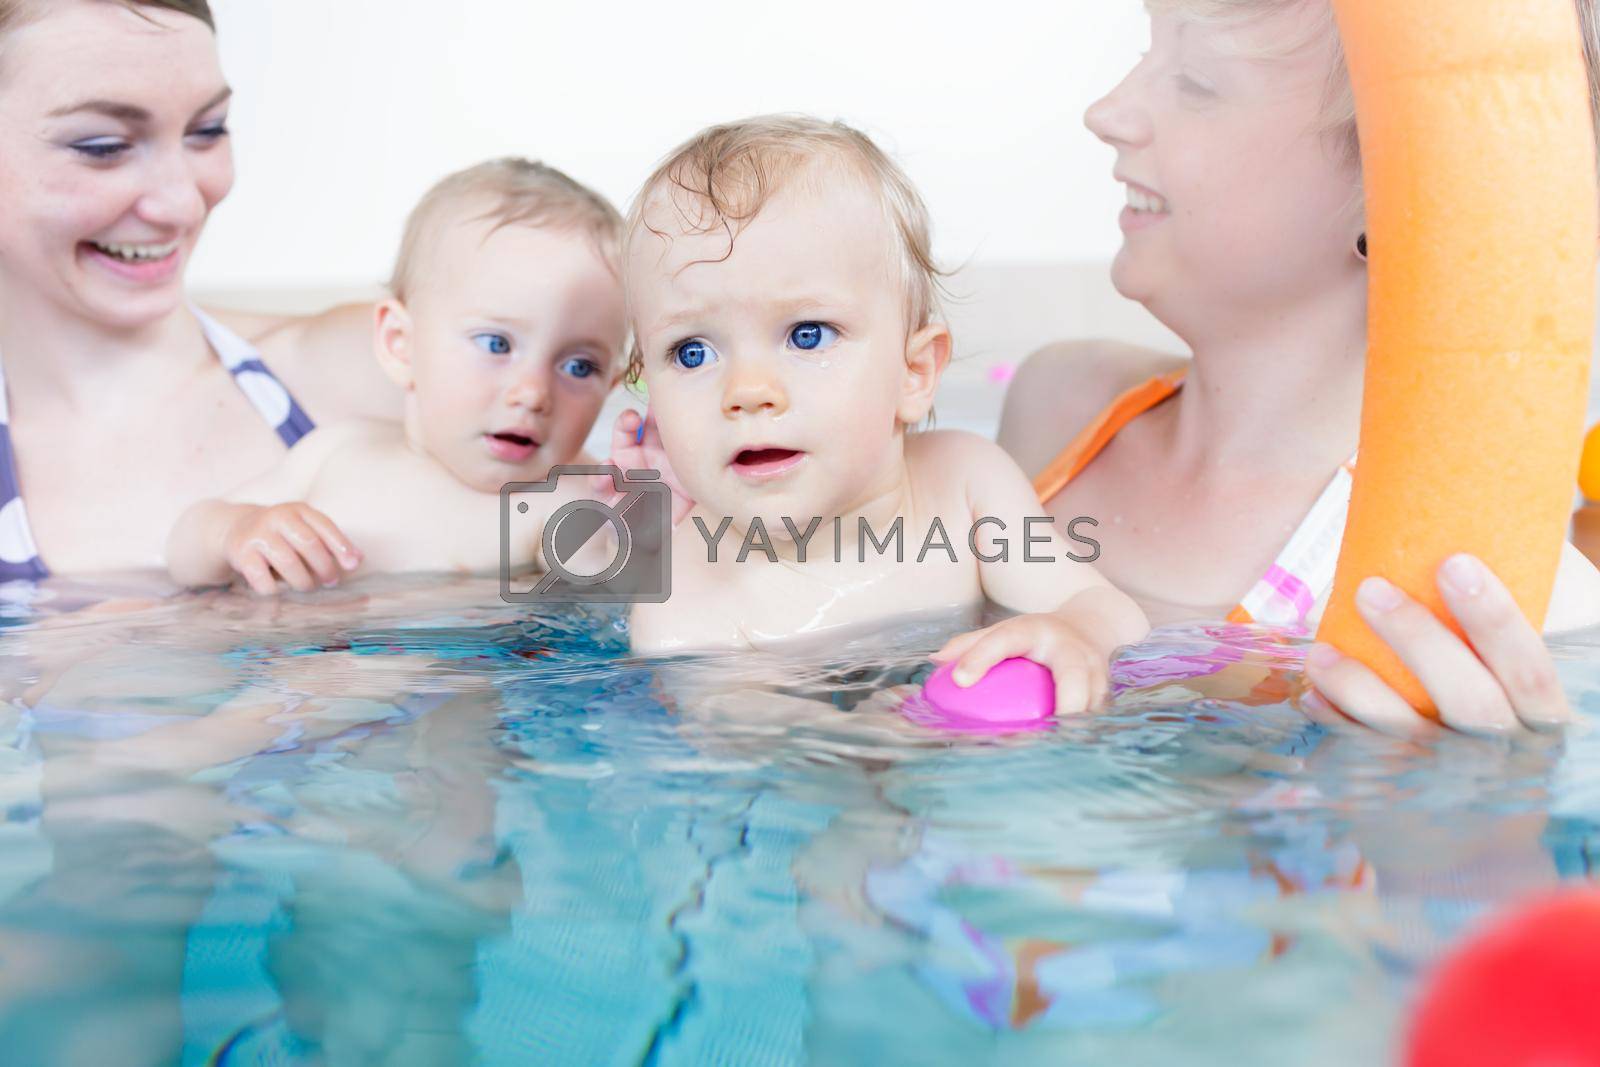 Royalty free image of Mothers being happy about their babies playing with each other by Kzenon